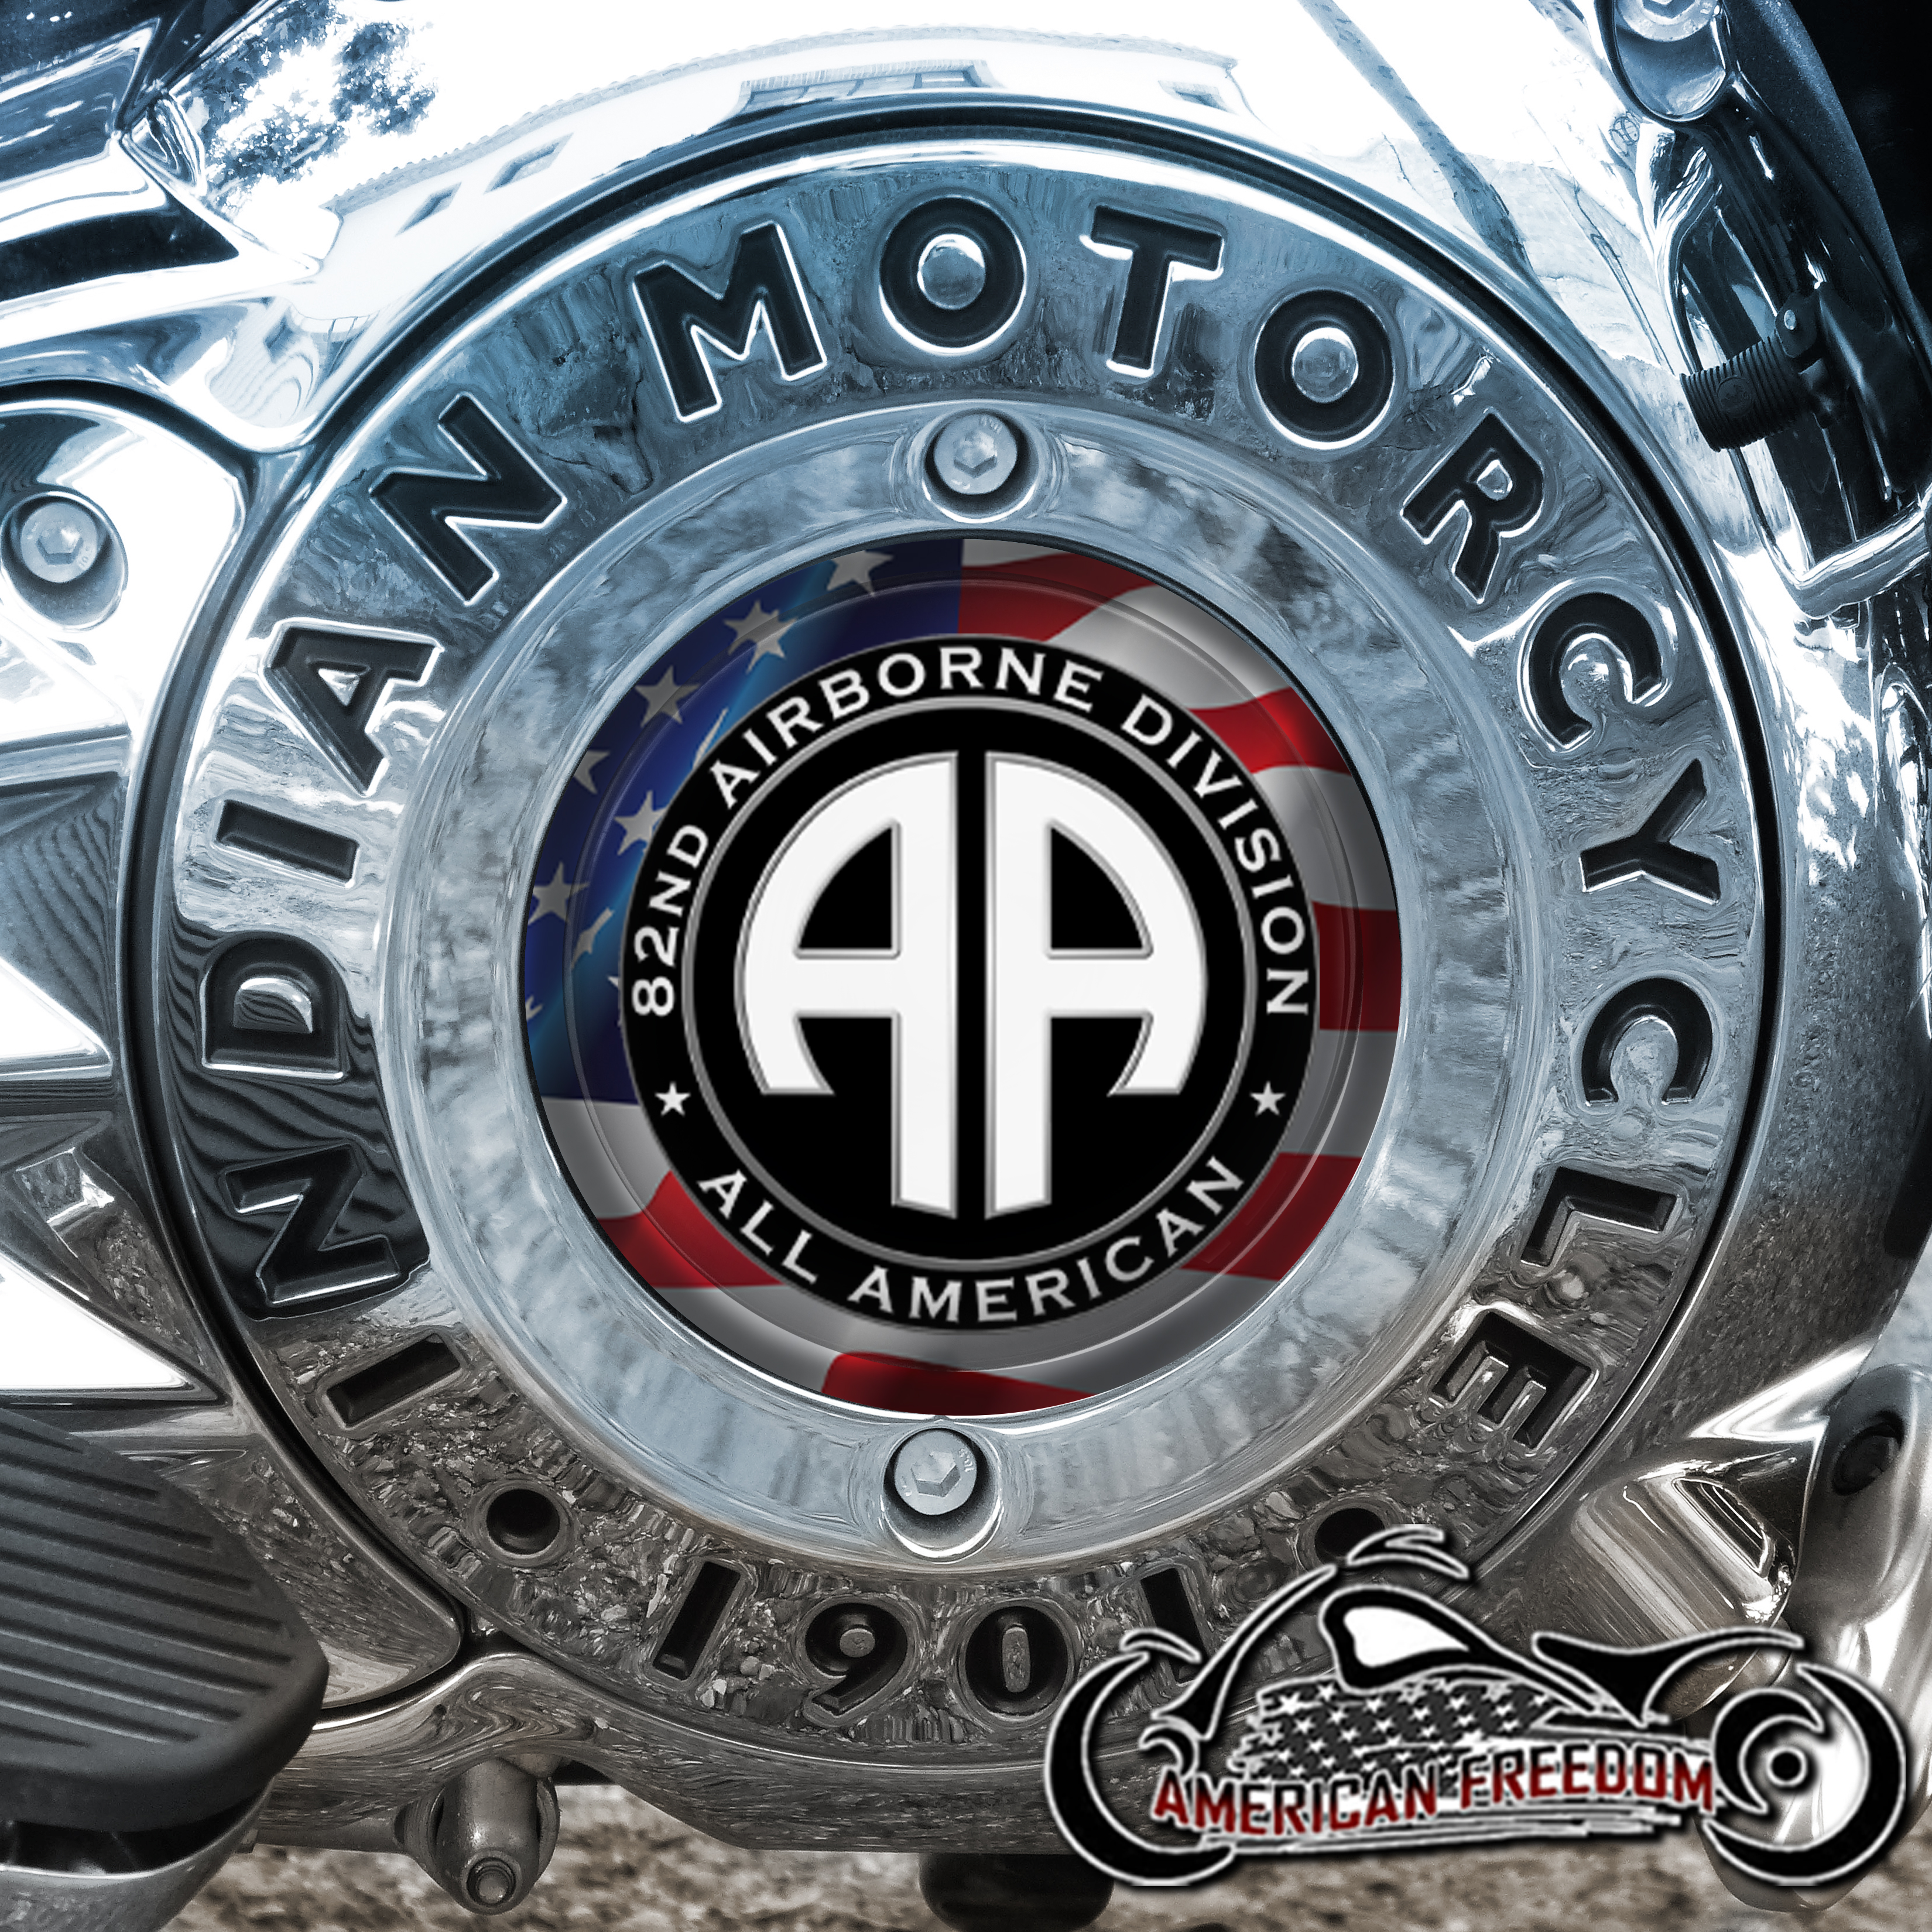 Indian Motorcycles Thunder Stroke Derby Insert - 82nd Airborne